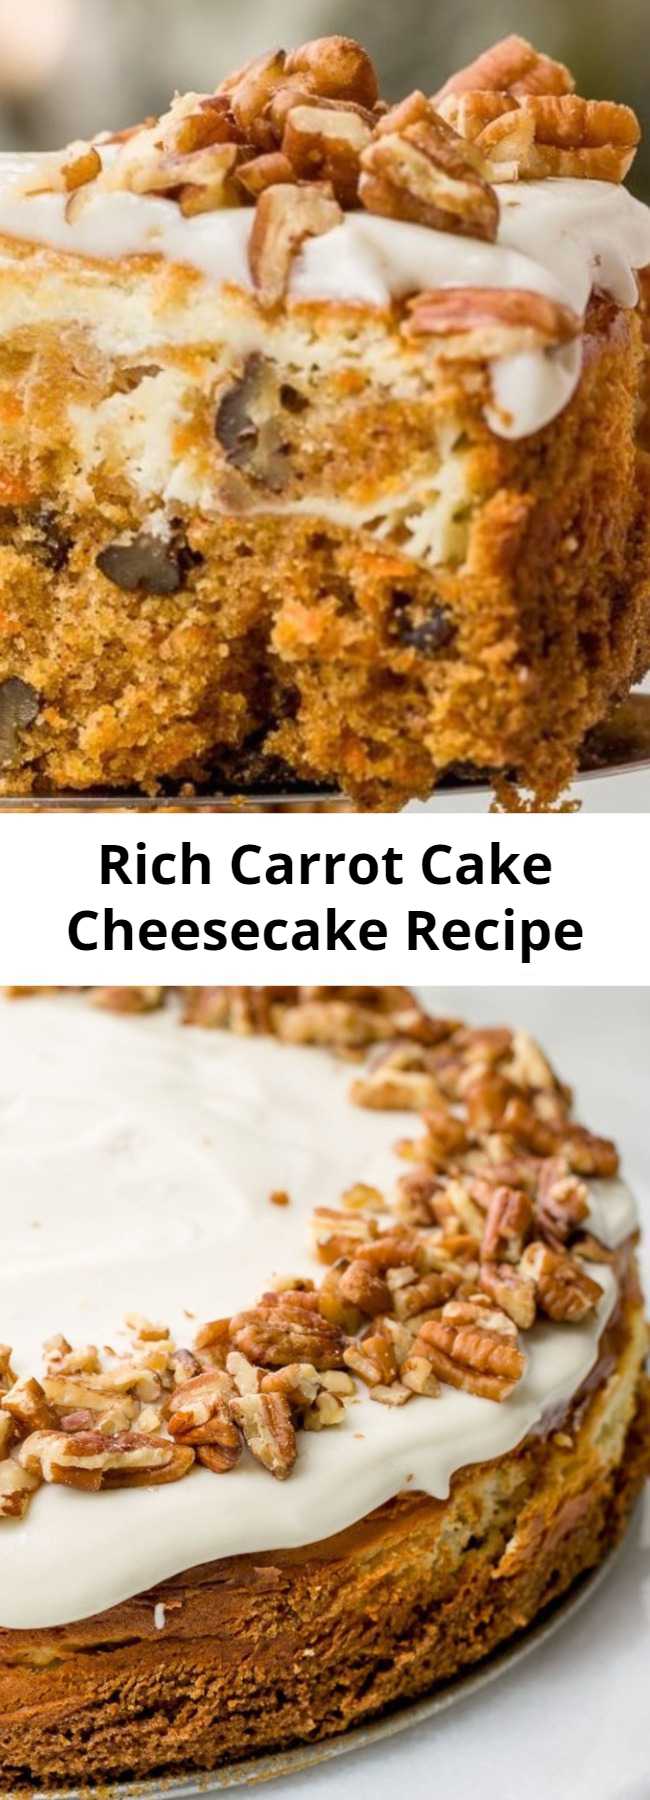 Rich Carrot Cake Cheesecake Recipe - Mash-ups don't get much better than this. With classic carrot cake on the bottom and rich, creamy cheesecake on top, we can't think of a better Easter dessert.